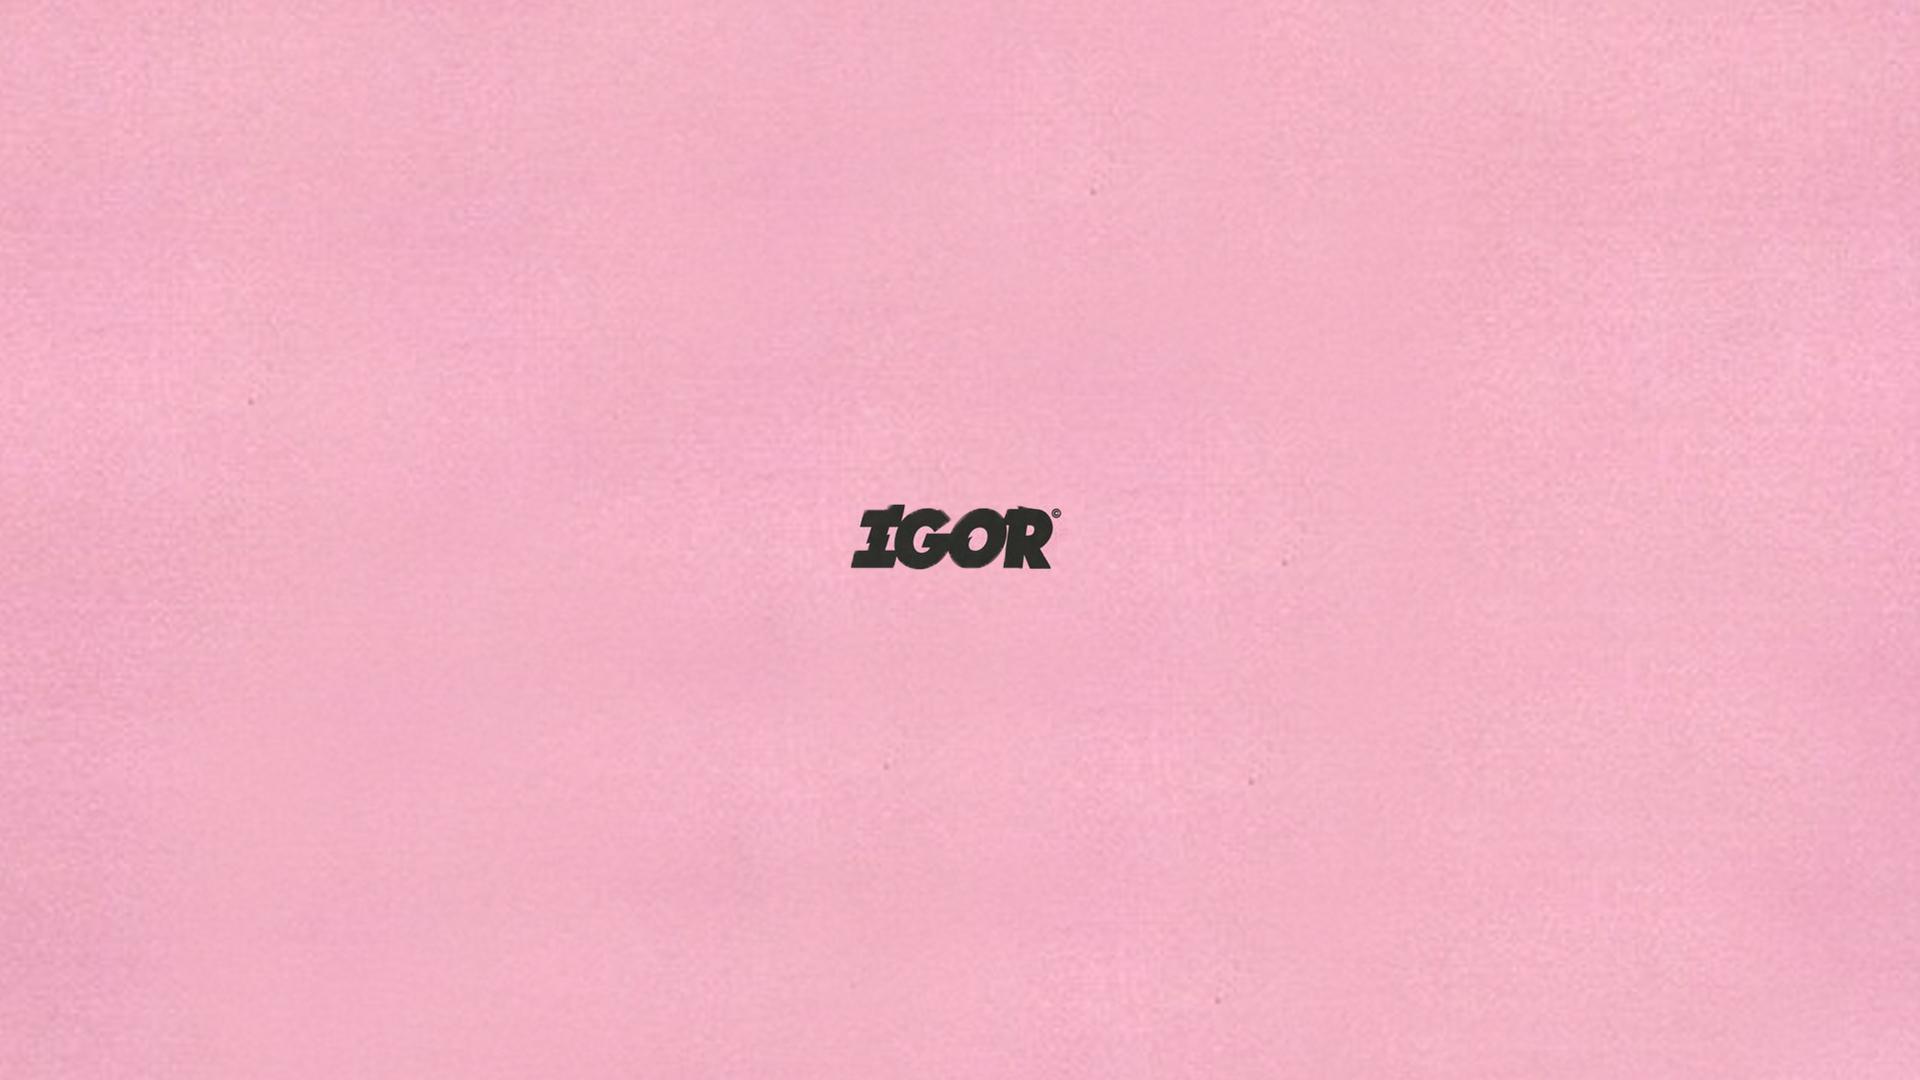 created a simple igor wallpaper for yall